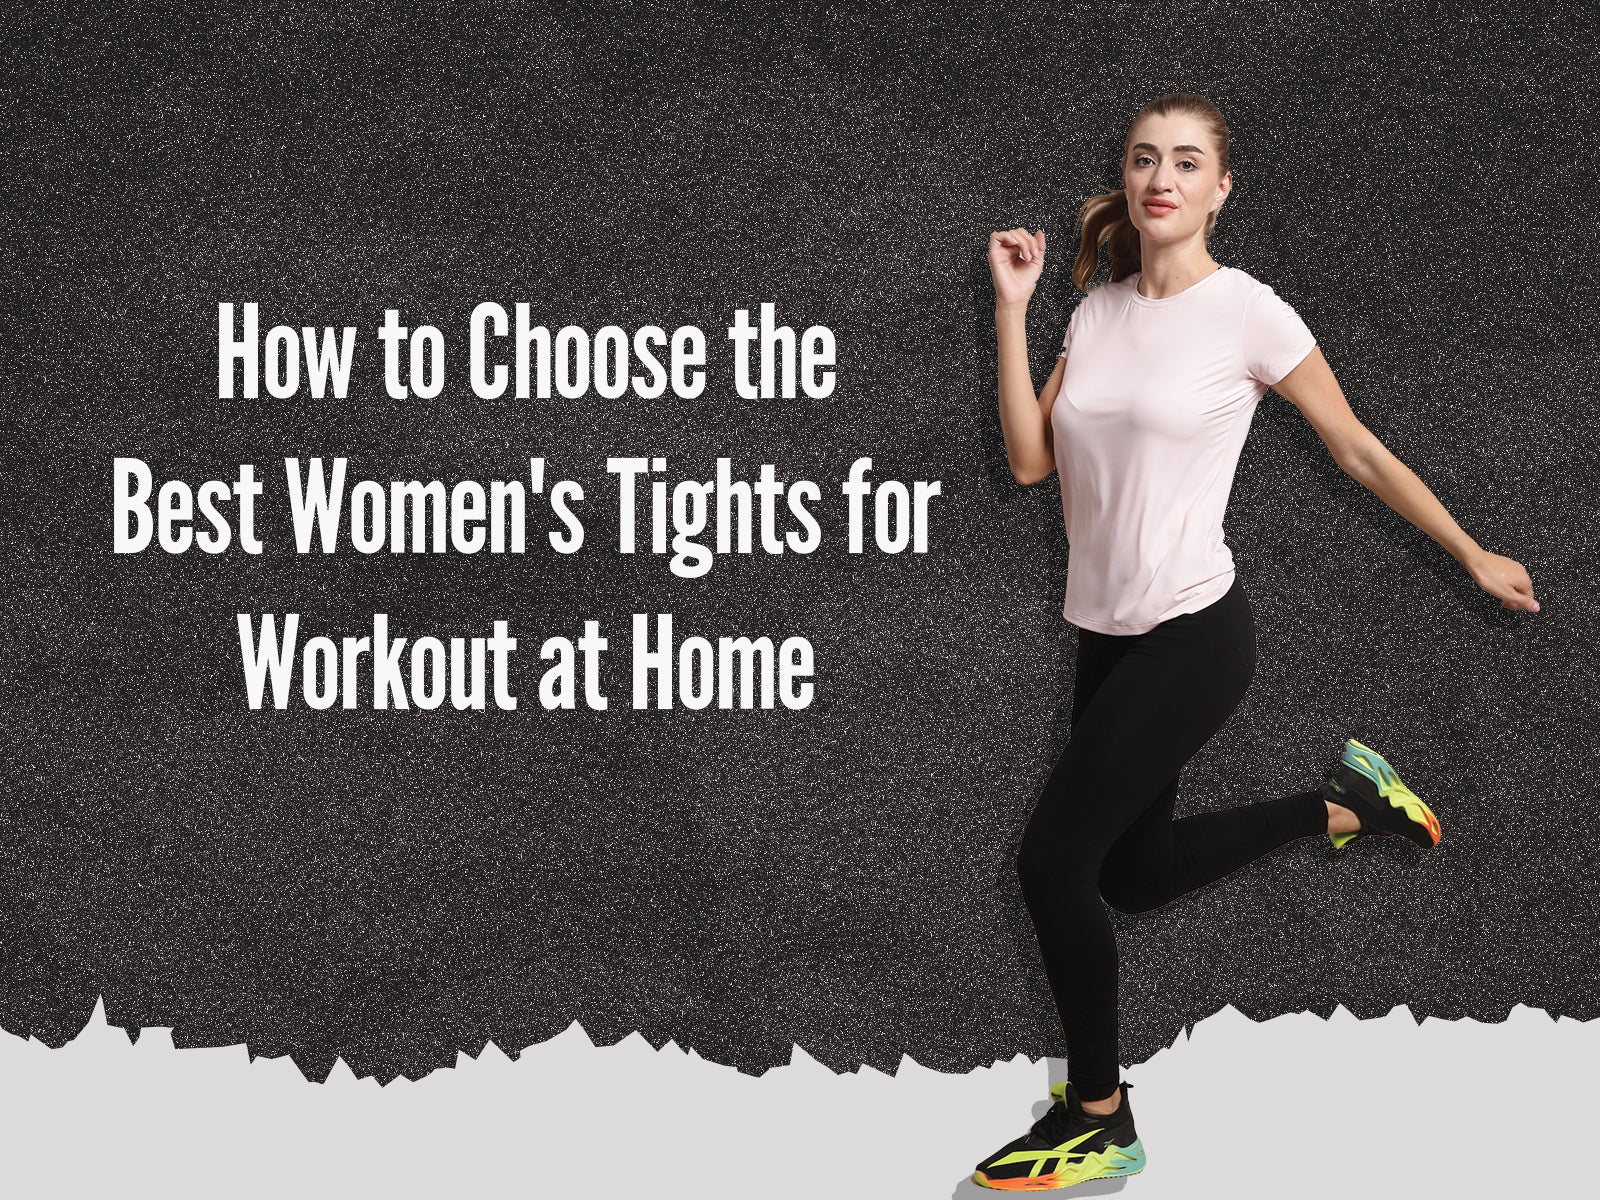 How to Choose the Best Women's Tights for Workout at Home